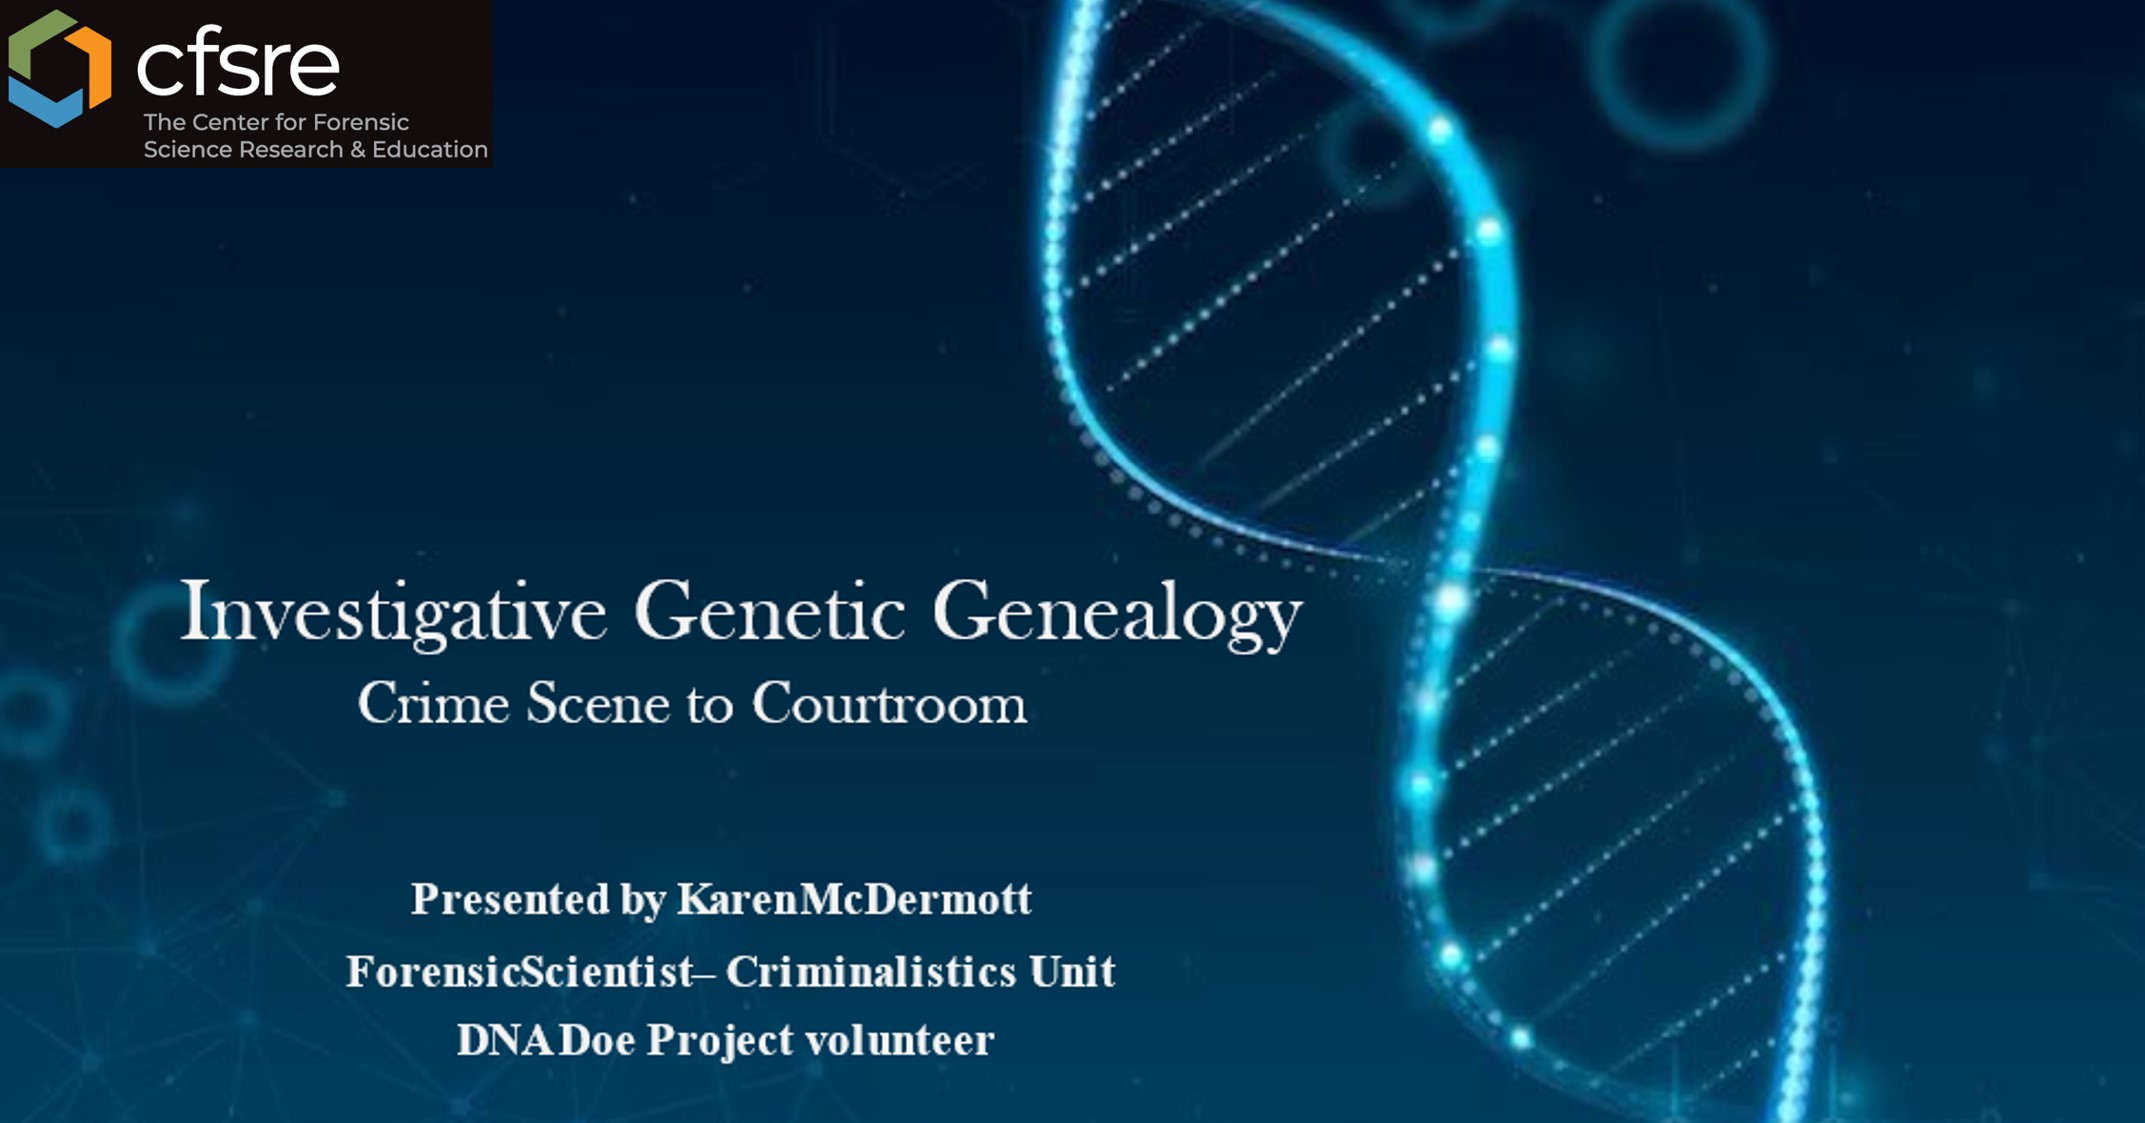 An Introduction to Investigative Genetic Genealogy - From Crime Scene to Courtroom